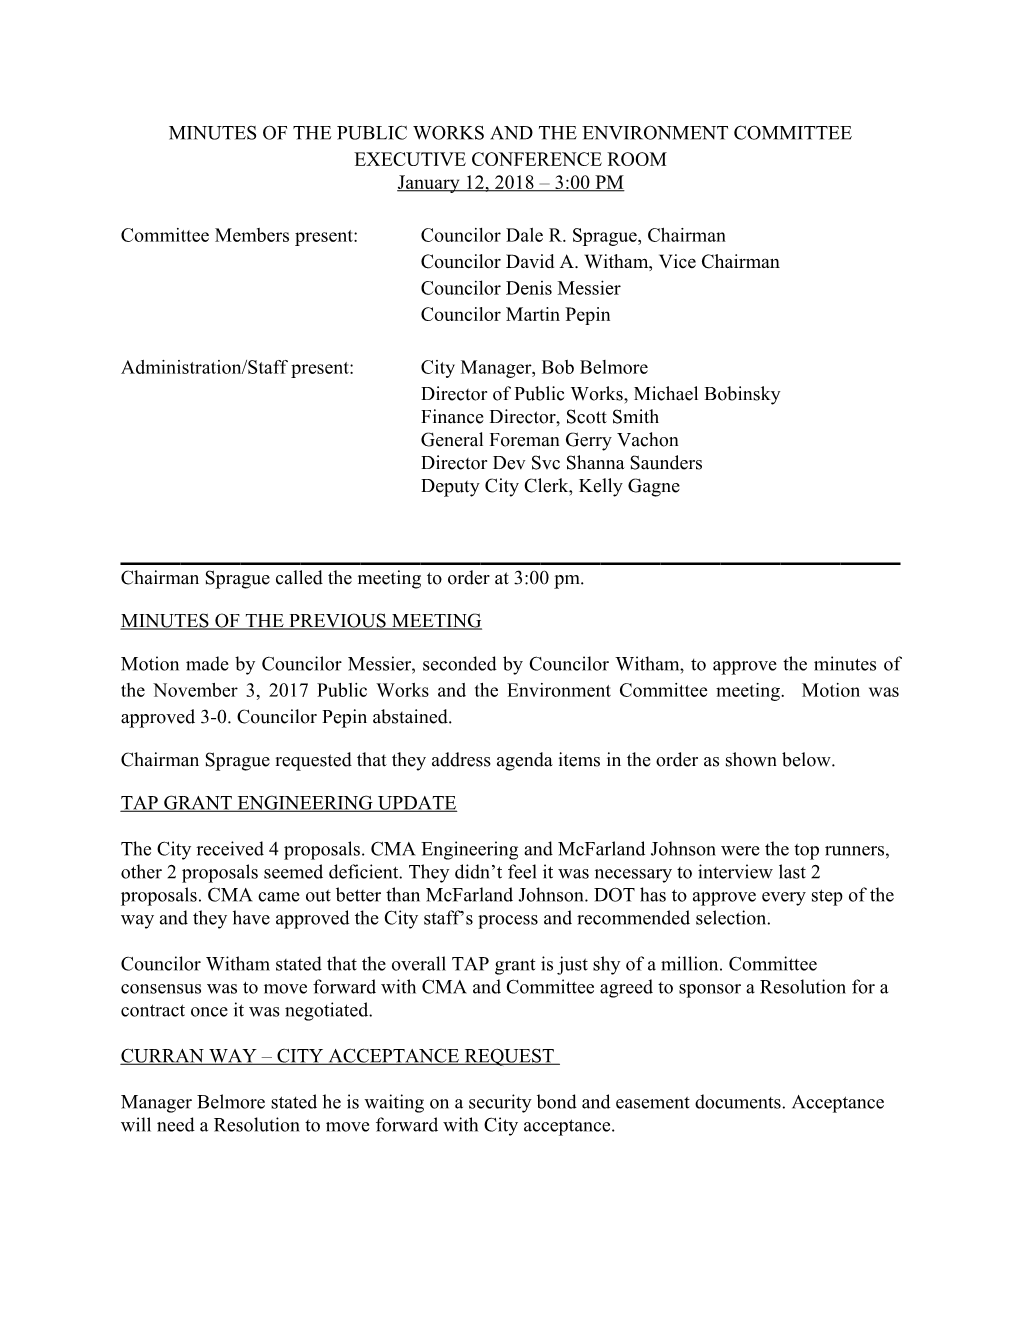 Minutes of the Public Works and the Environment Committee